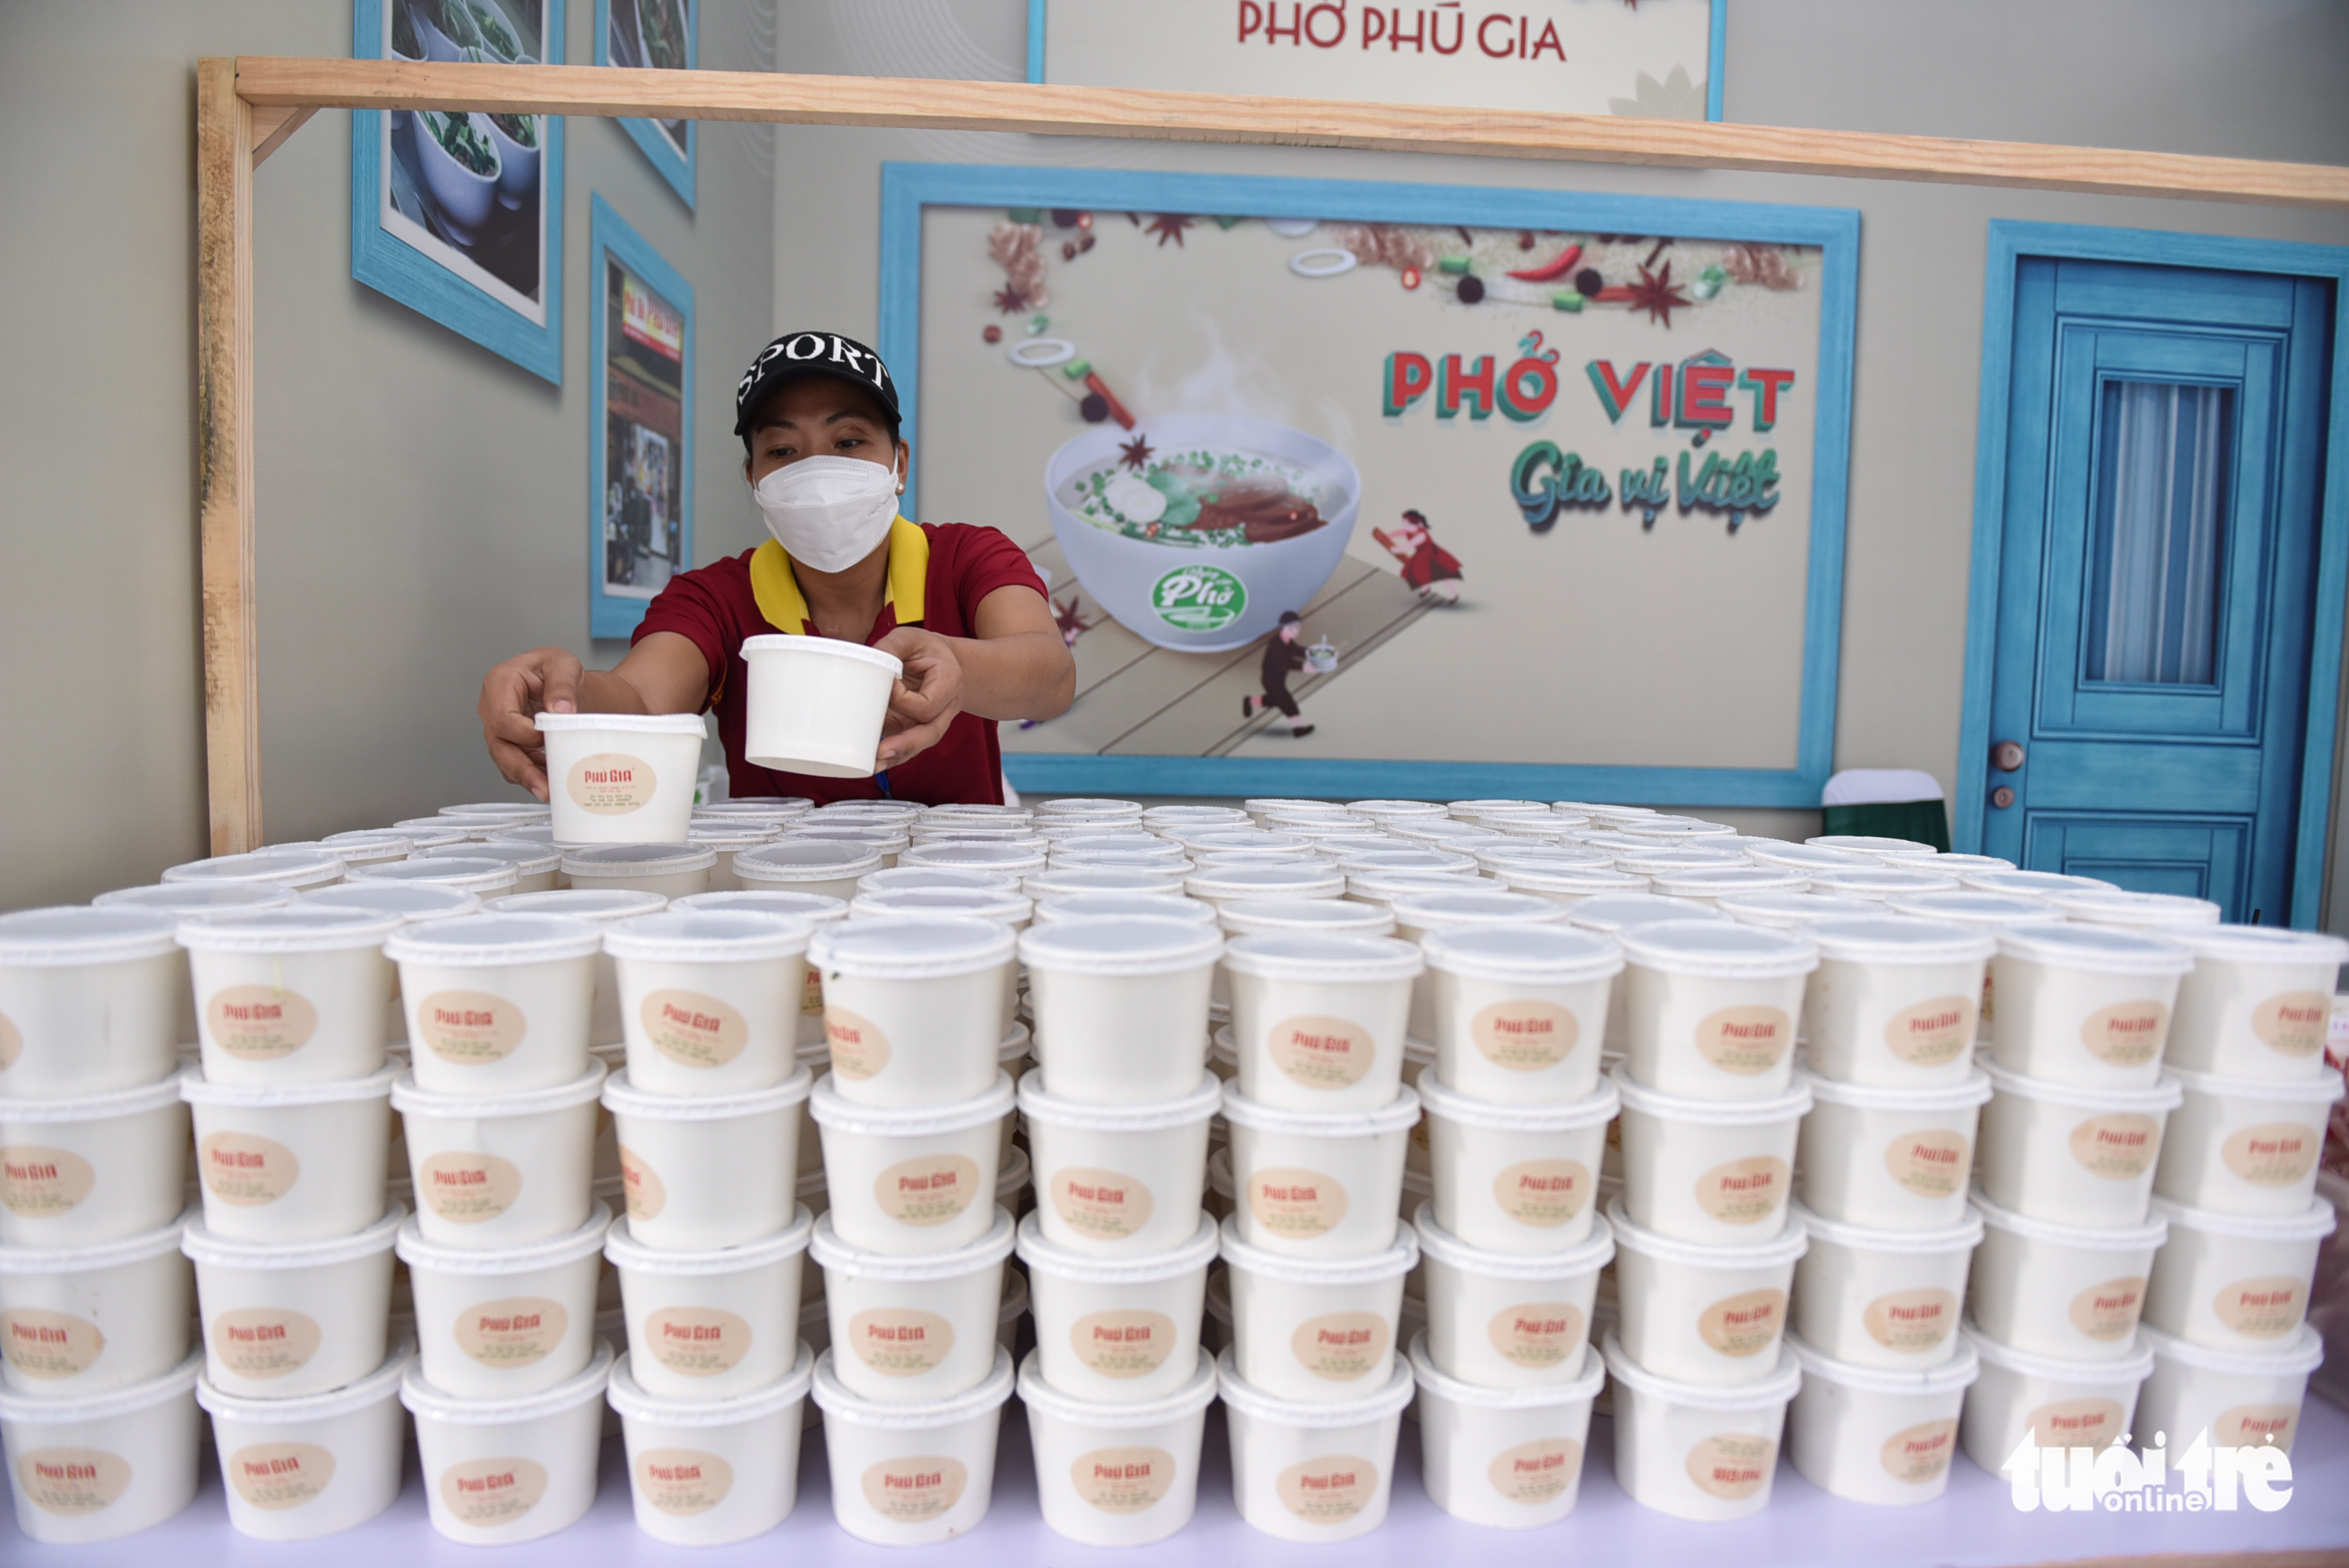 A woman prepares bowls of pho to serve customers at the 2021 Day of Pho in Ho Chi Minh City, December 12, 2021. Photo: Tuoi Tre